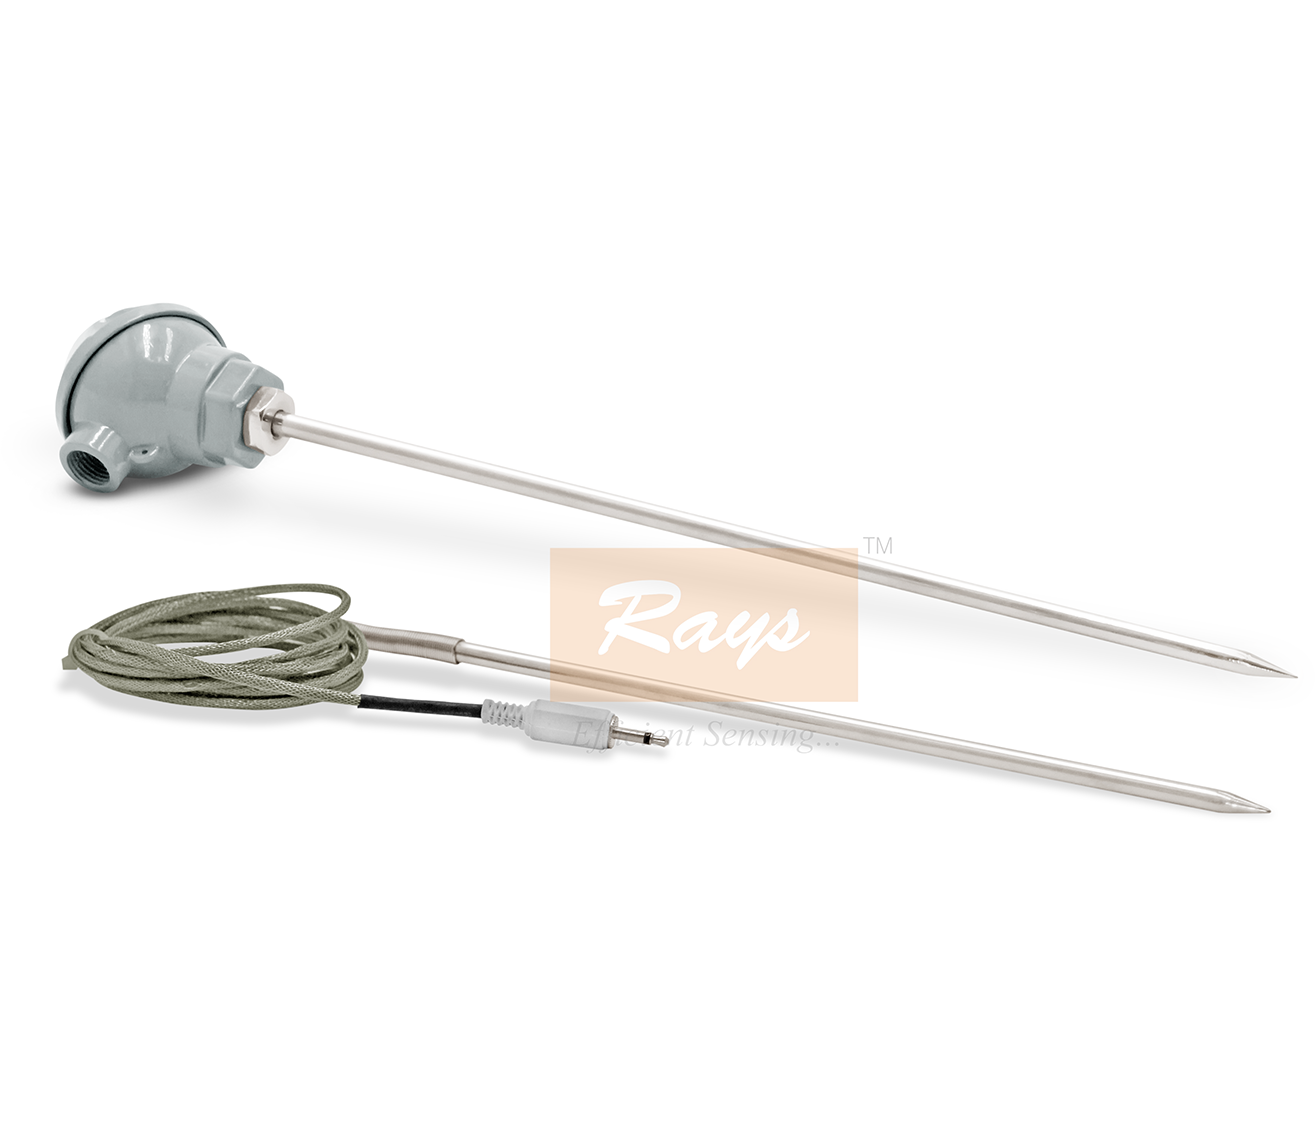 Food Penetration Probes with Miniature Head or Extension Cable